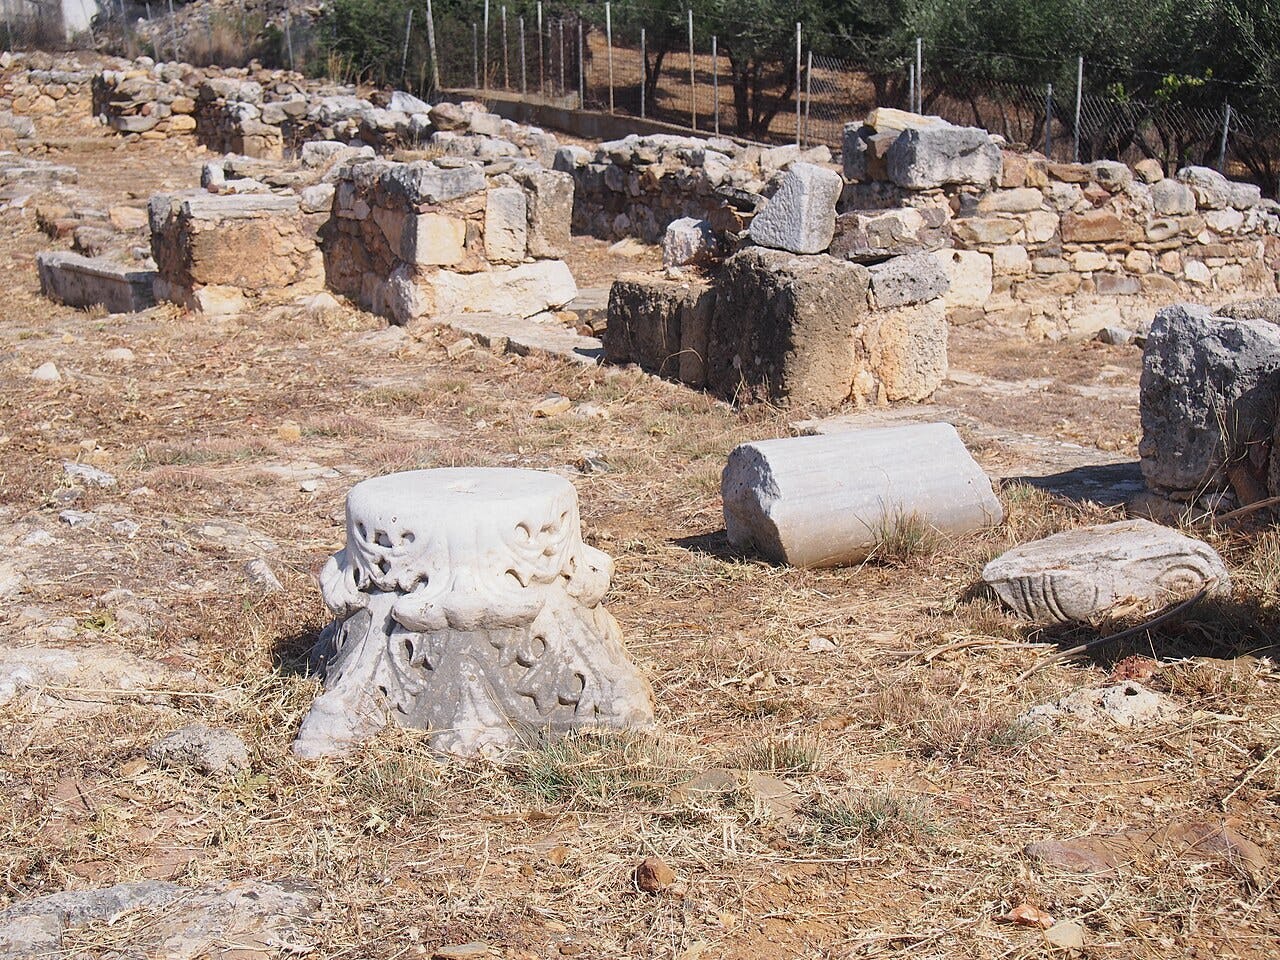 The Ruins of the Early Christian Basilica of Panormos